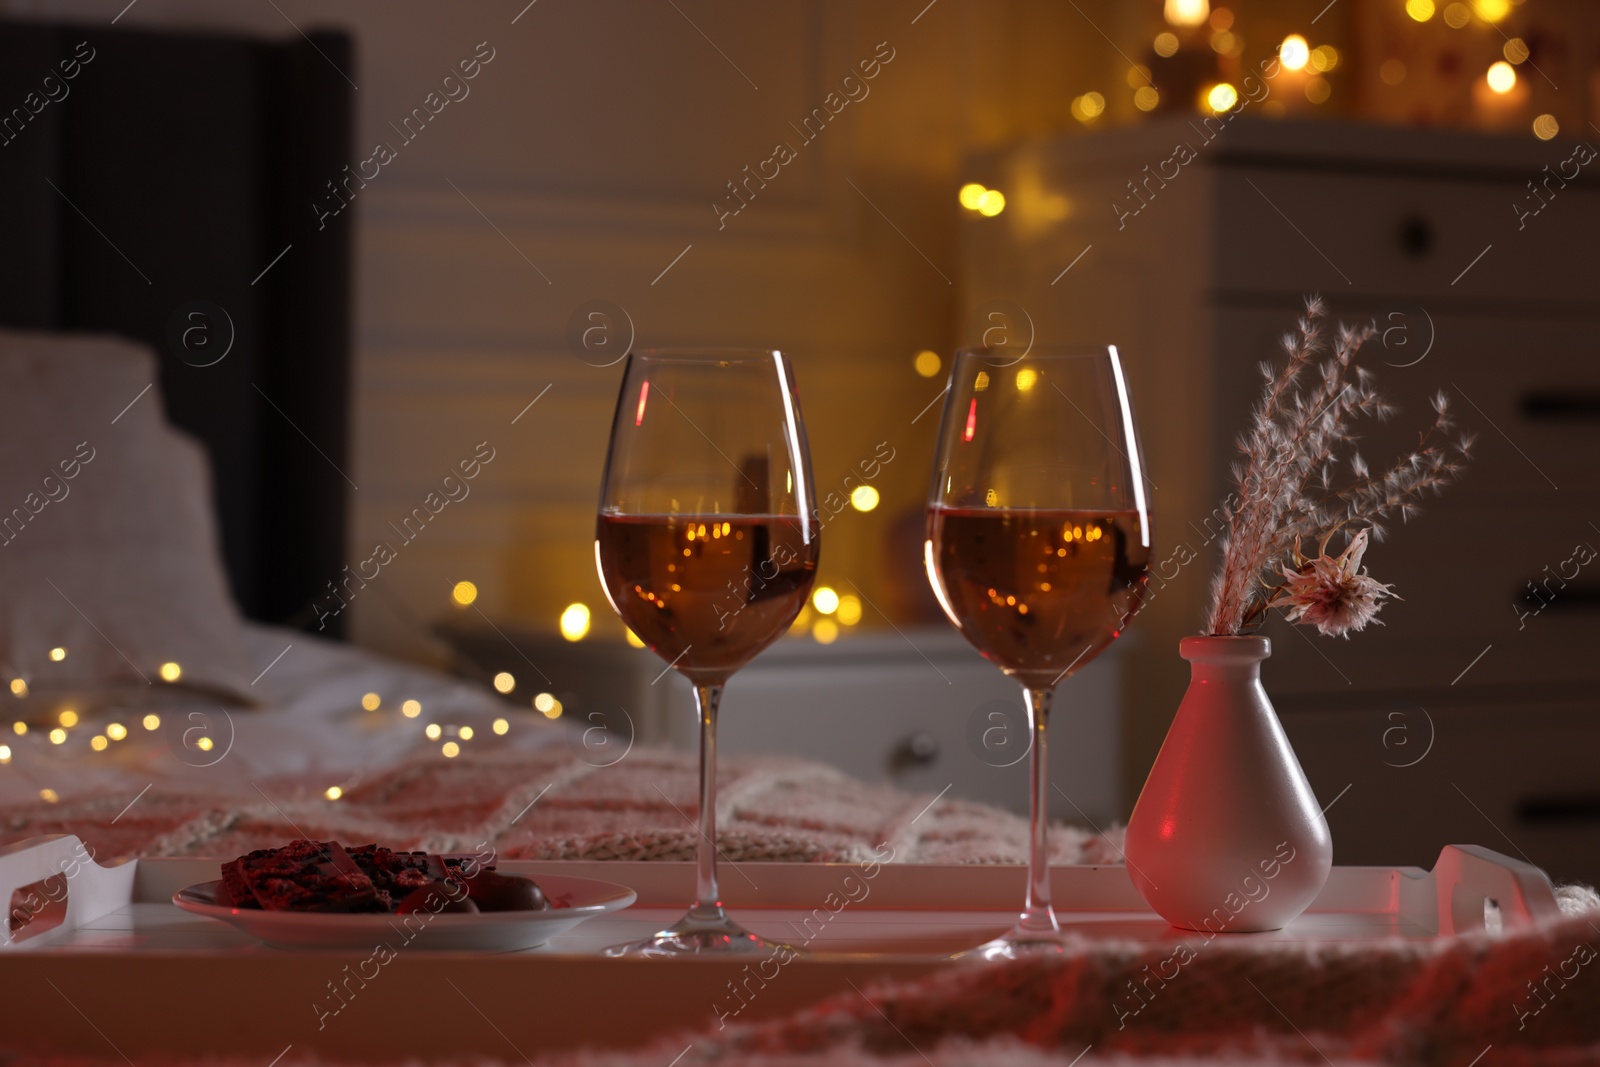 Photo of Glasses of wine in bedroom adorned for romantic evening